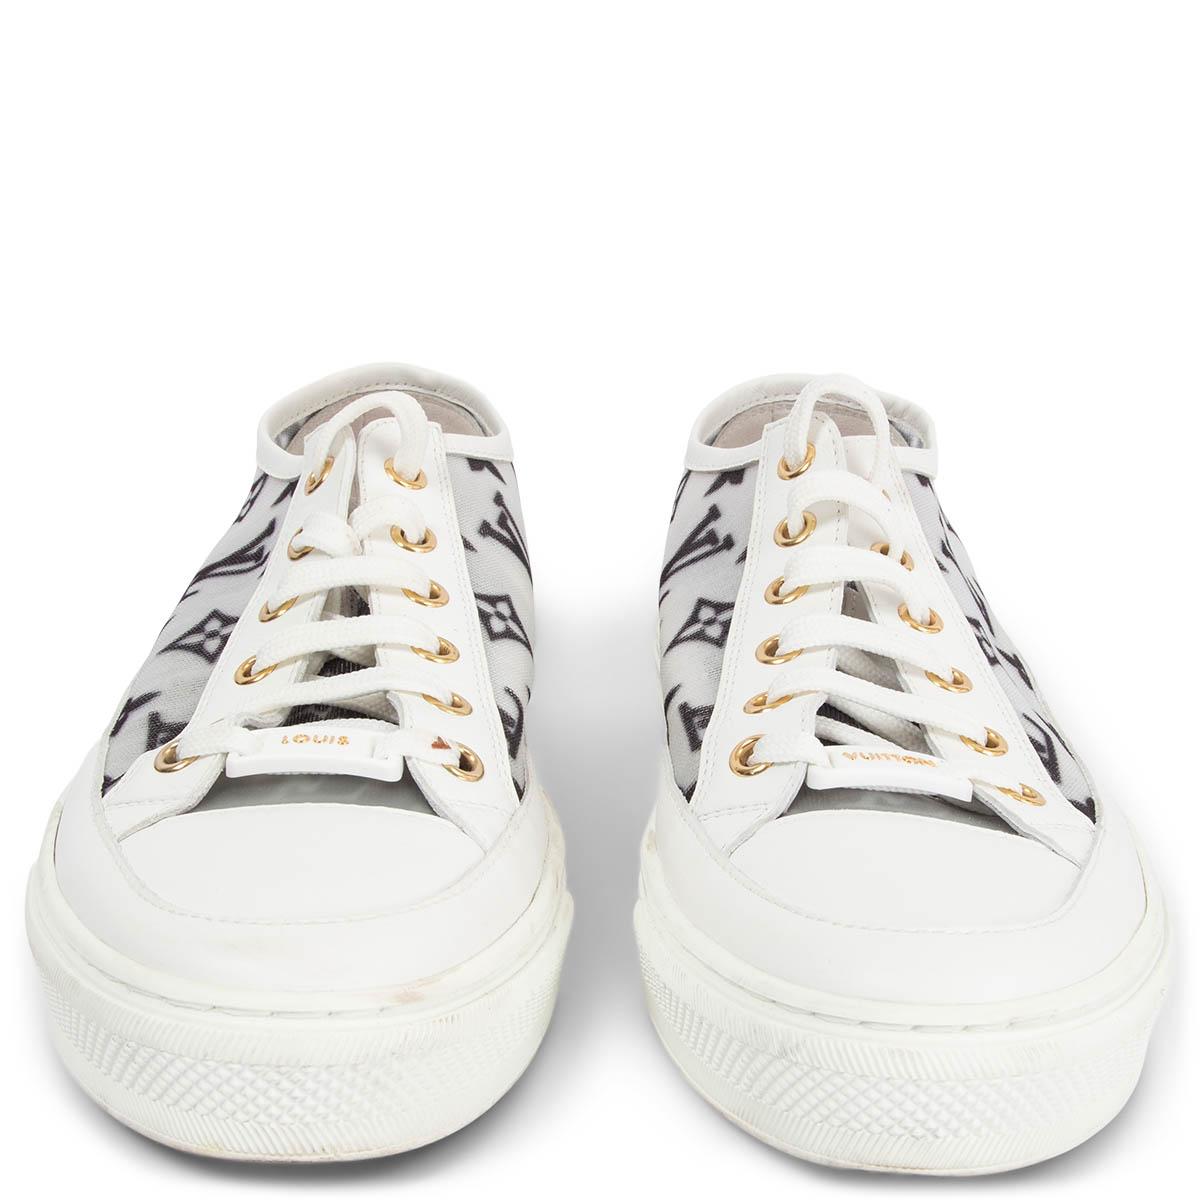 100% authentic Louis Vuitton S/S 2020 Stellar low top sneakers in white & black monogram mesh with white leather trims and tip set on white rubber soles. Have been worn and are in excellent condition.

Measurements
Imprinted Size	38
Shoe